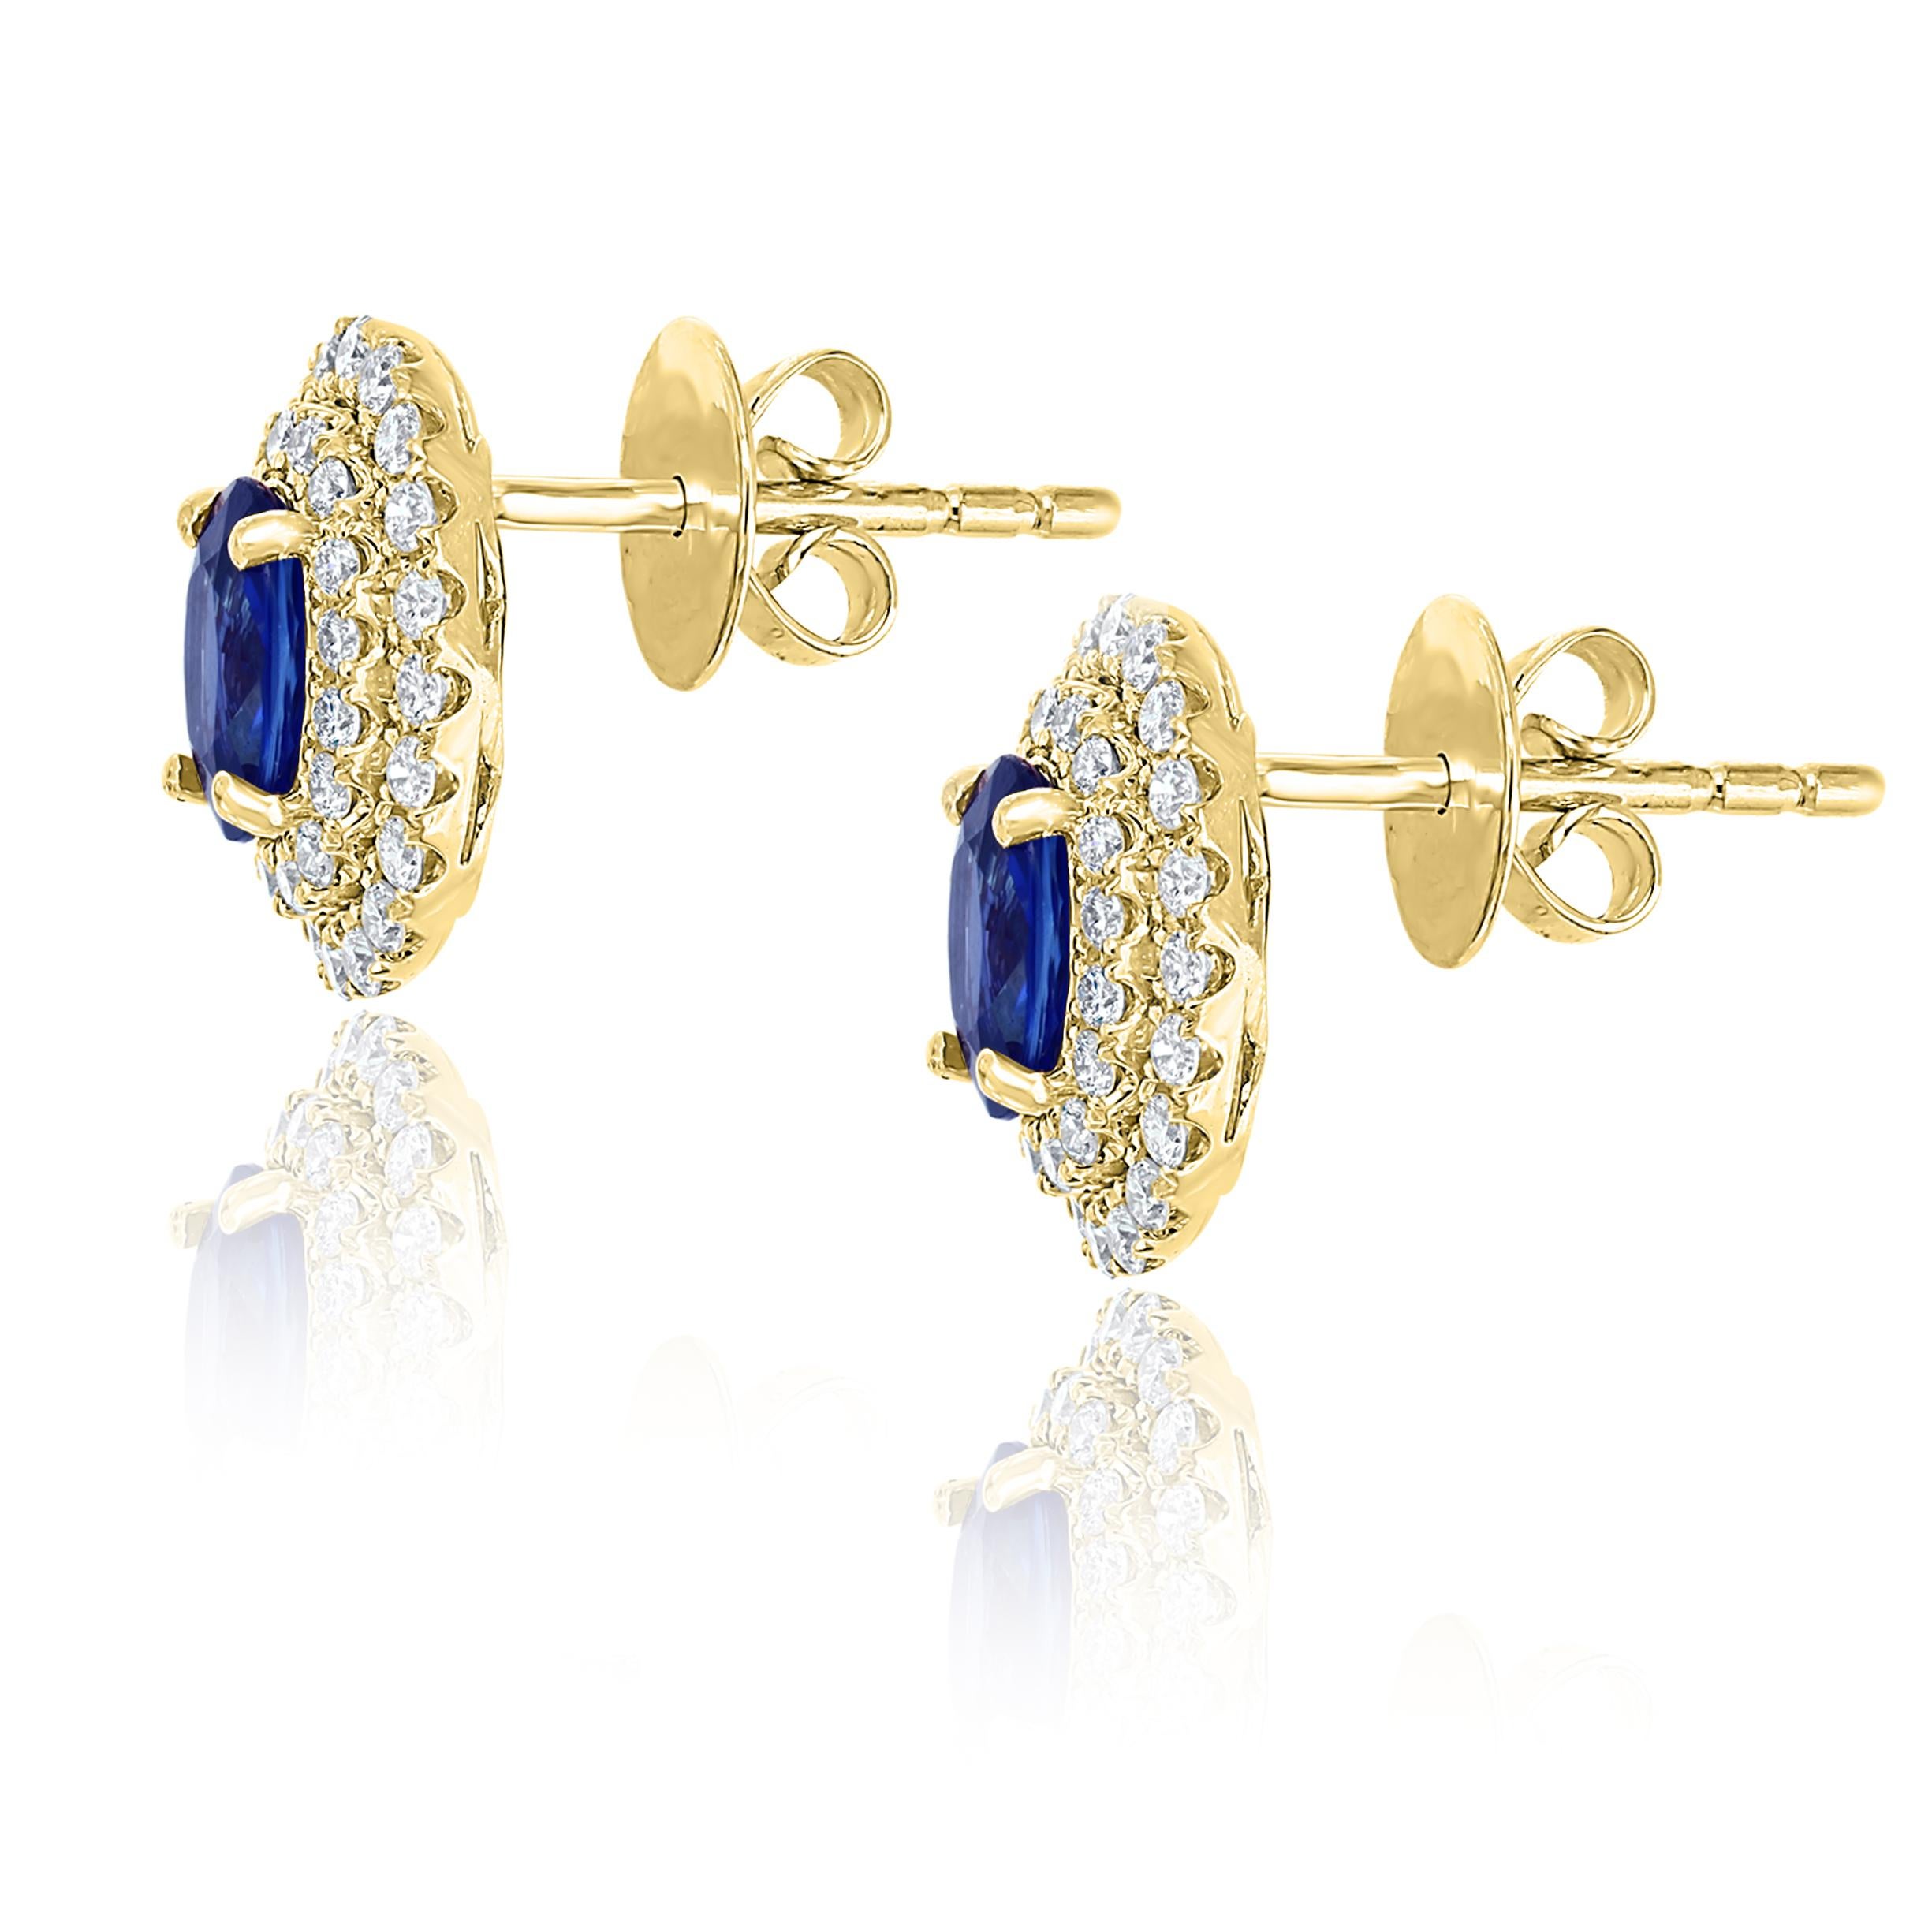 A simple pair of stud earrings showcasing 1.03 carats of oval cut blue sapphires, surrounded by a double row of 72 round brilliant diamonds weighing 0.48 carat. Made in 18 karats yellow gold.  